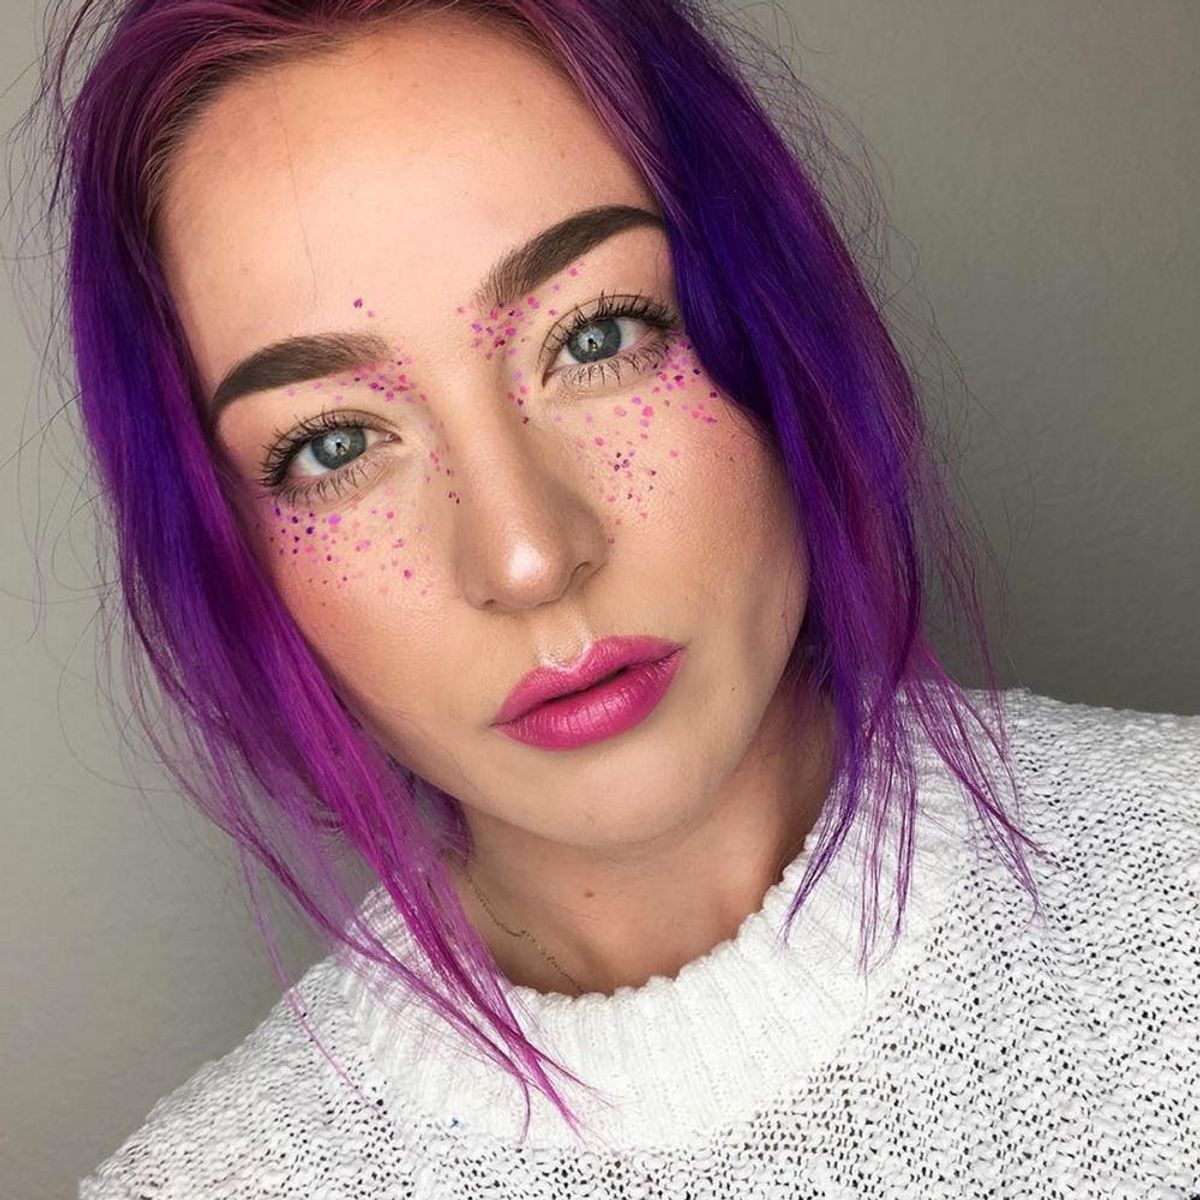 Rainbow Freckles Are the Crazy New Beauty Trend You Need to Try